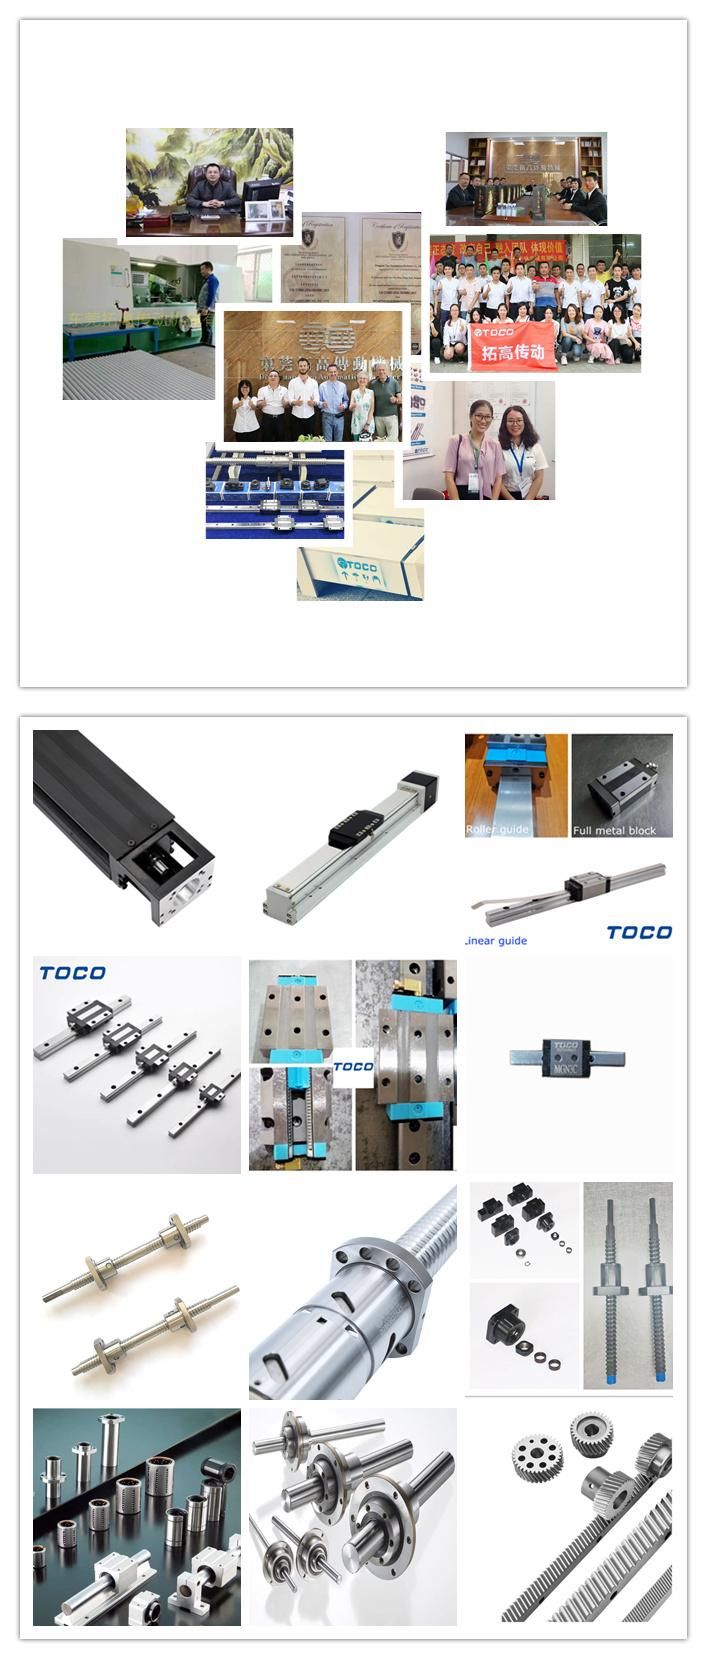 Tgps Linear Module for Lifting Machine Packing Use Reciprocator Automatic Painting